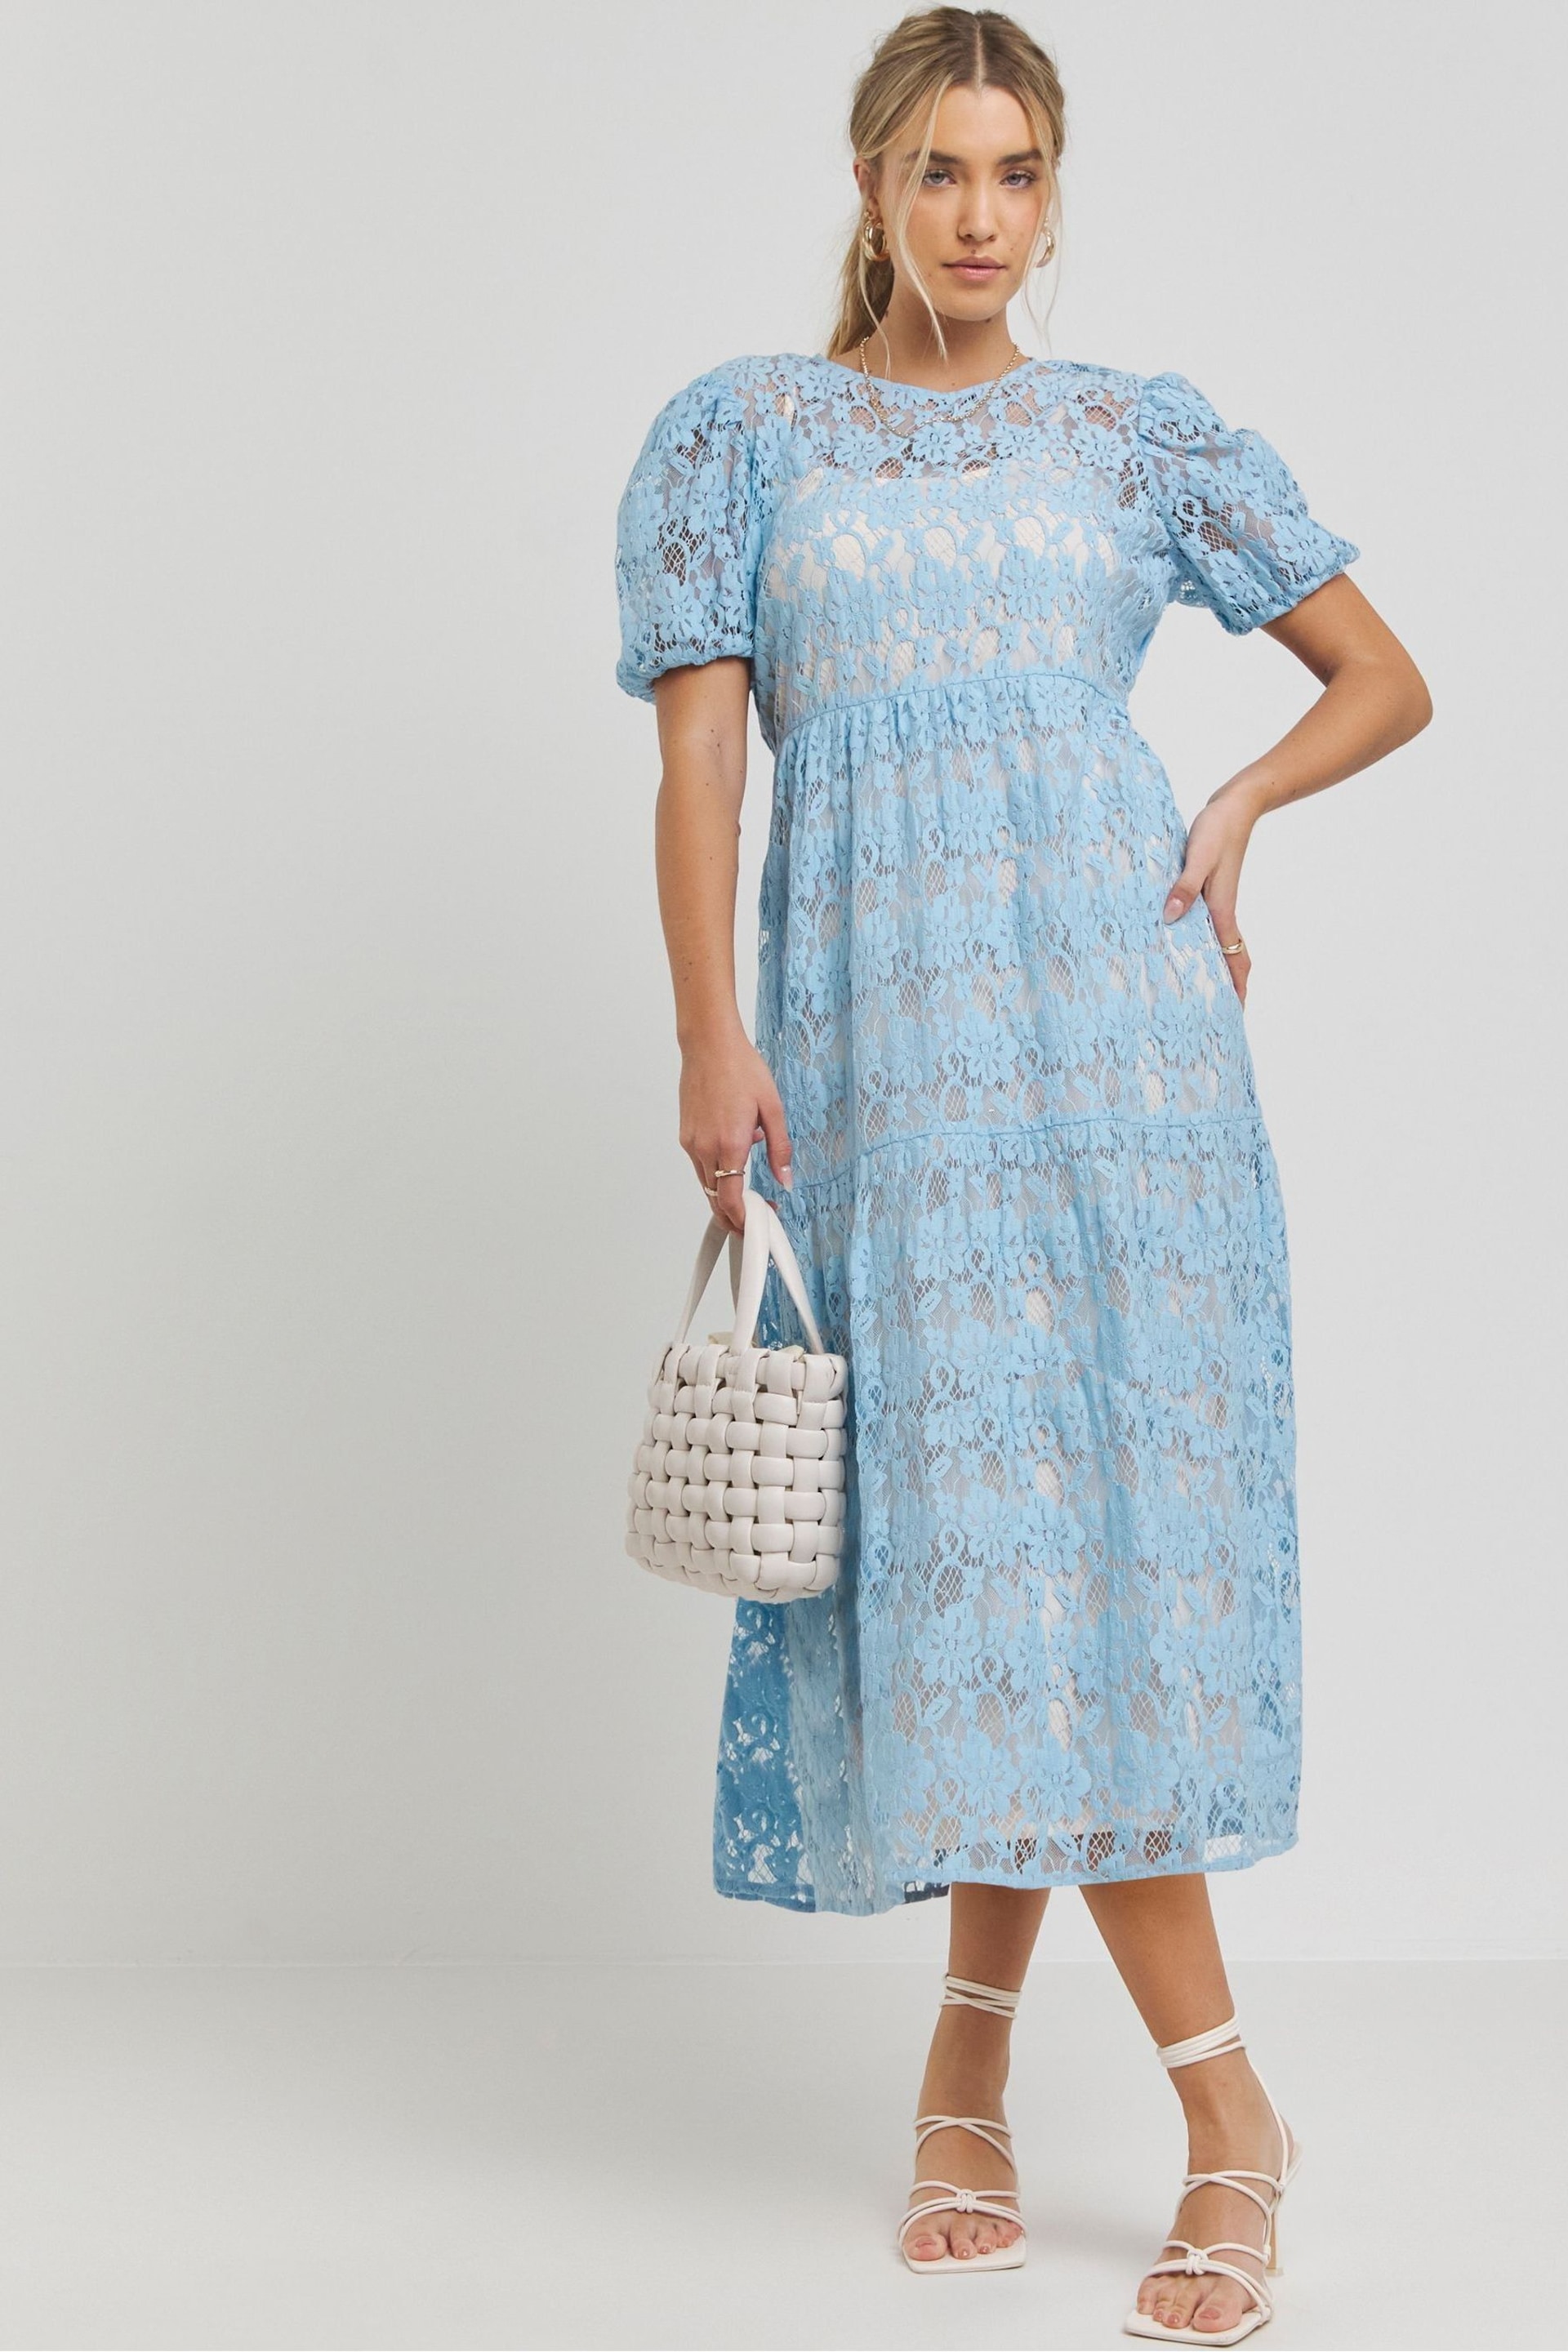 Simply Be Blue Lace Midi Dress - Image 1 of 4